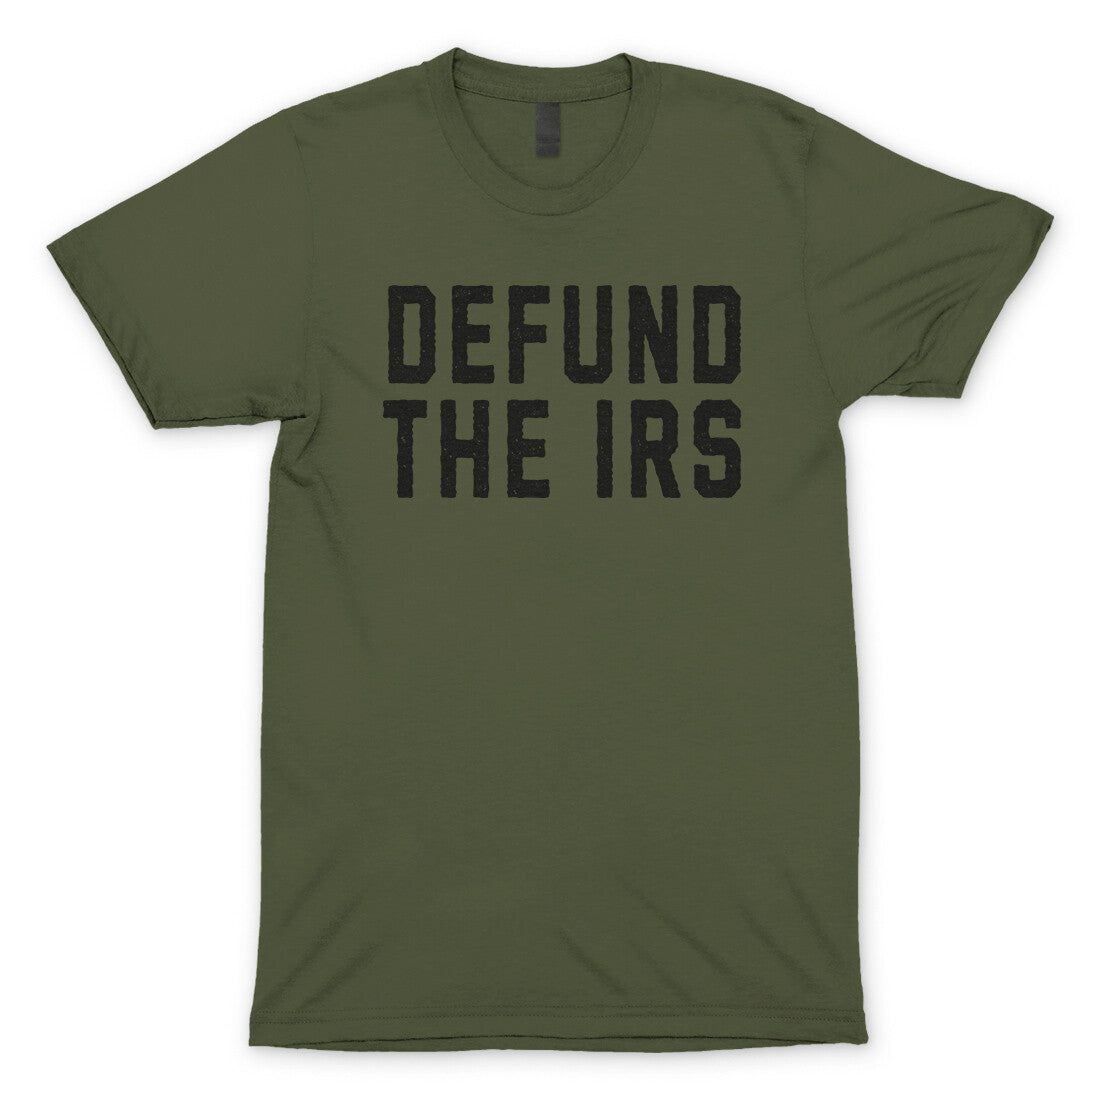 Defund the IRS in Military Green Color